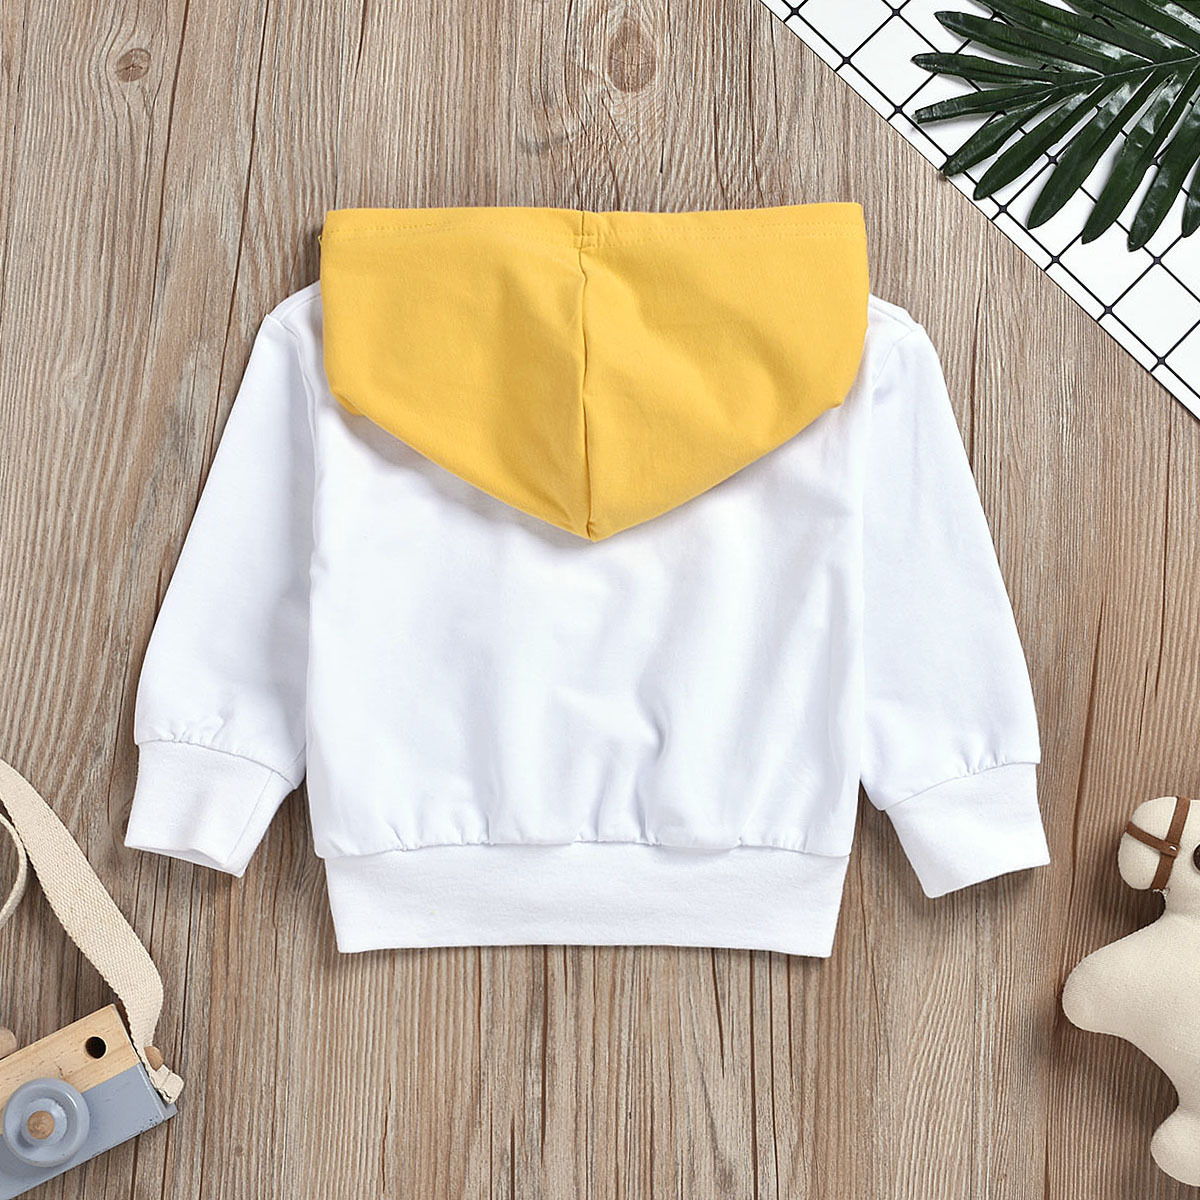 Girls Fashion Children's Clothing Hooded Colorblock Letter Sweater Children's Korean Version Cute Top Casual Versatile Long Sleeves